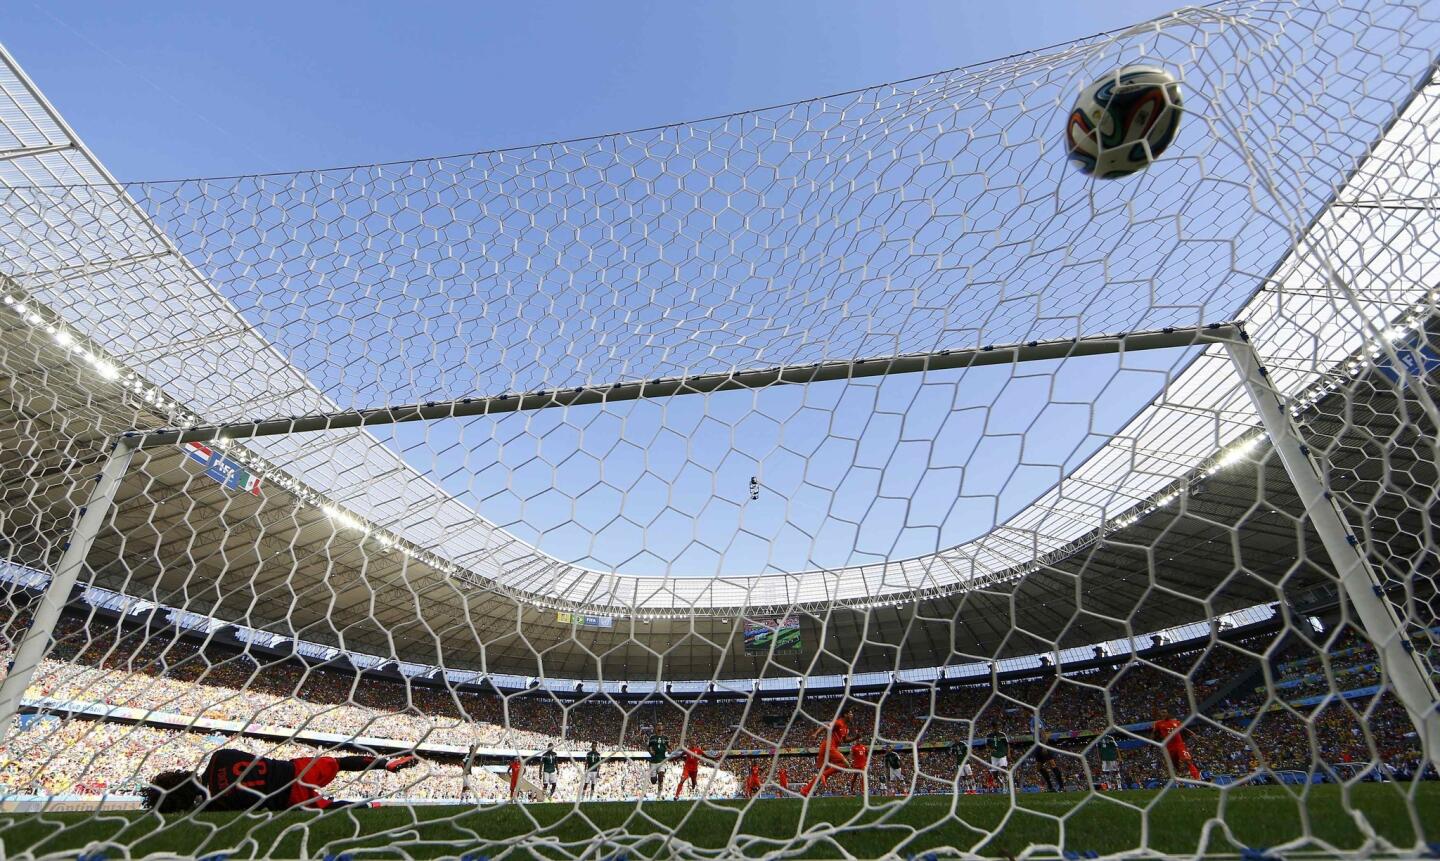 Mexico's goalkeeper Ochoa dives but fails to prevent a goal during a penalty kick by Klaas-Jan Huntelaar of the Netherlands in their 2014 World Cup round of 16 game at the Castelao arena in Fortaleza